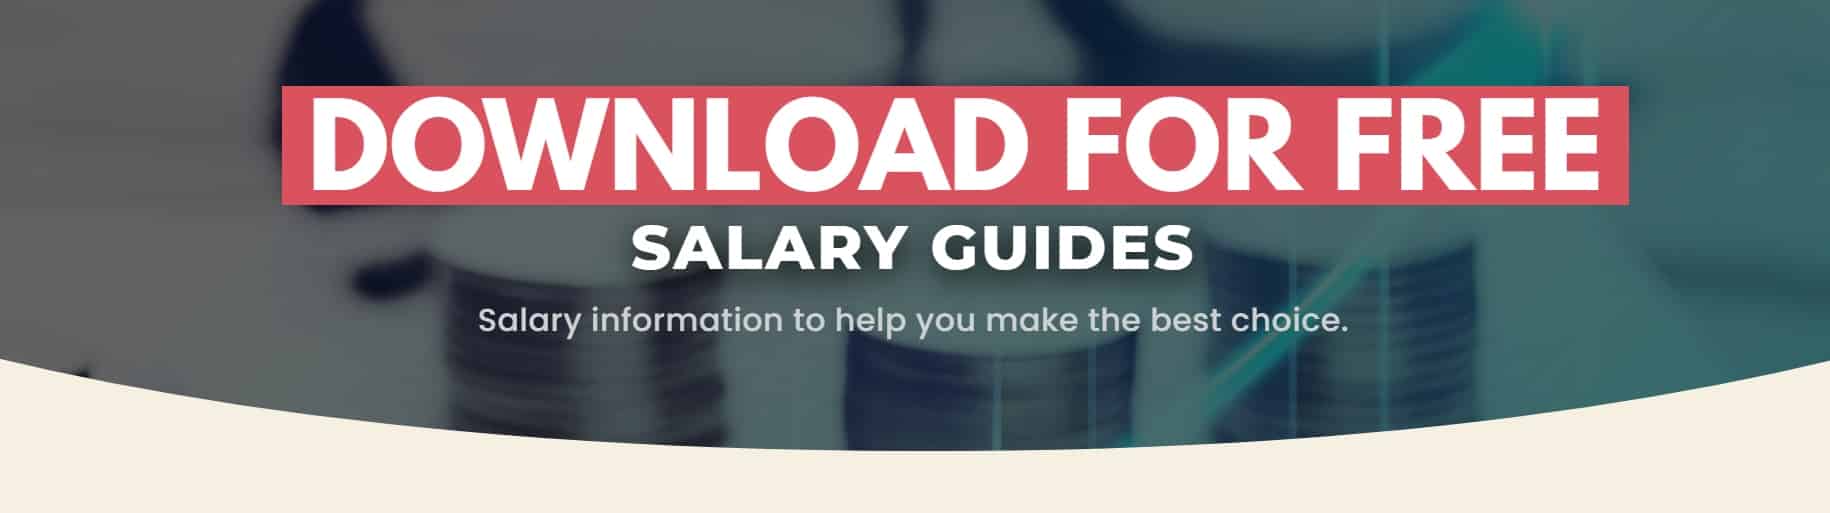 Opti Salary Guide Banner Salary Guides for 2022 1 1